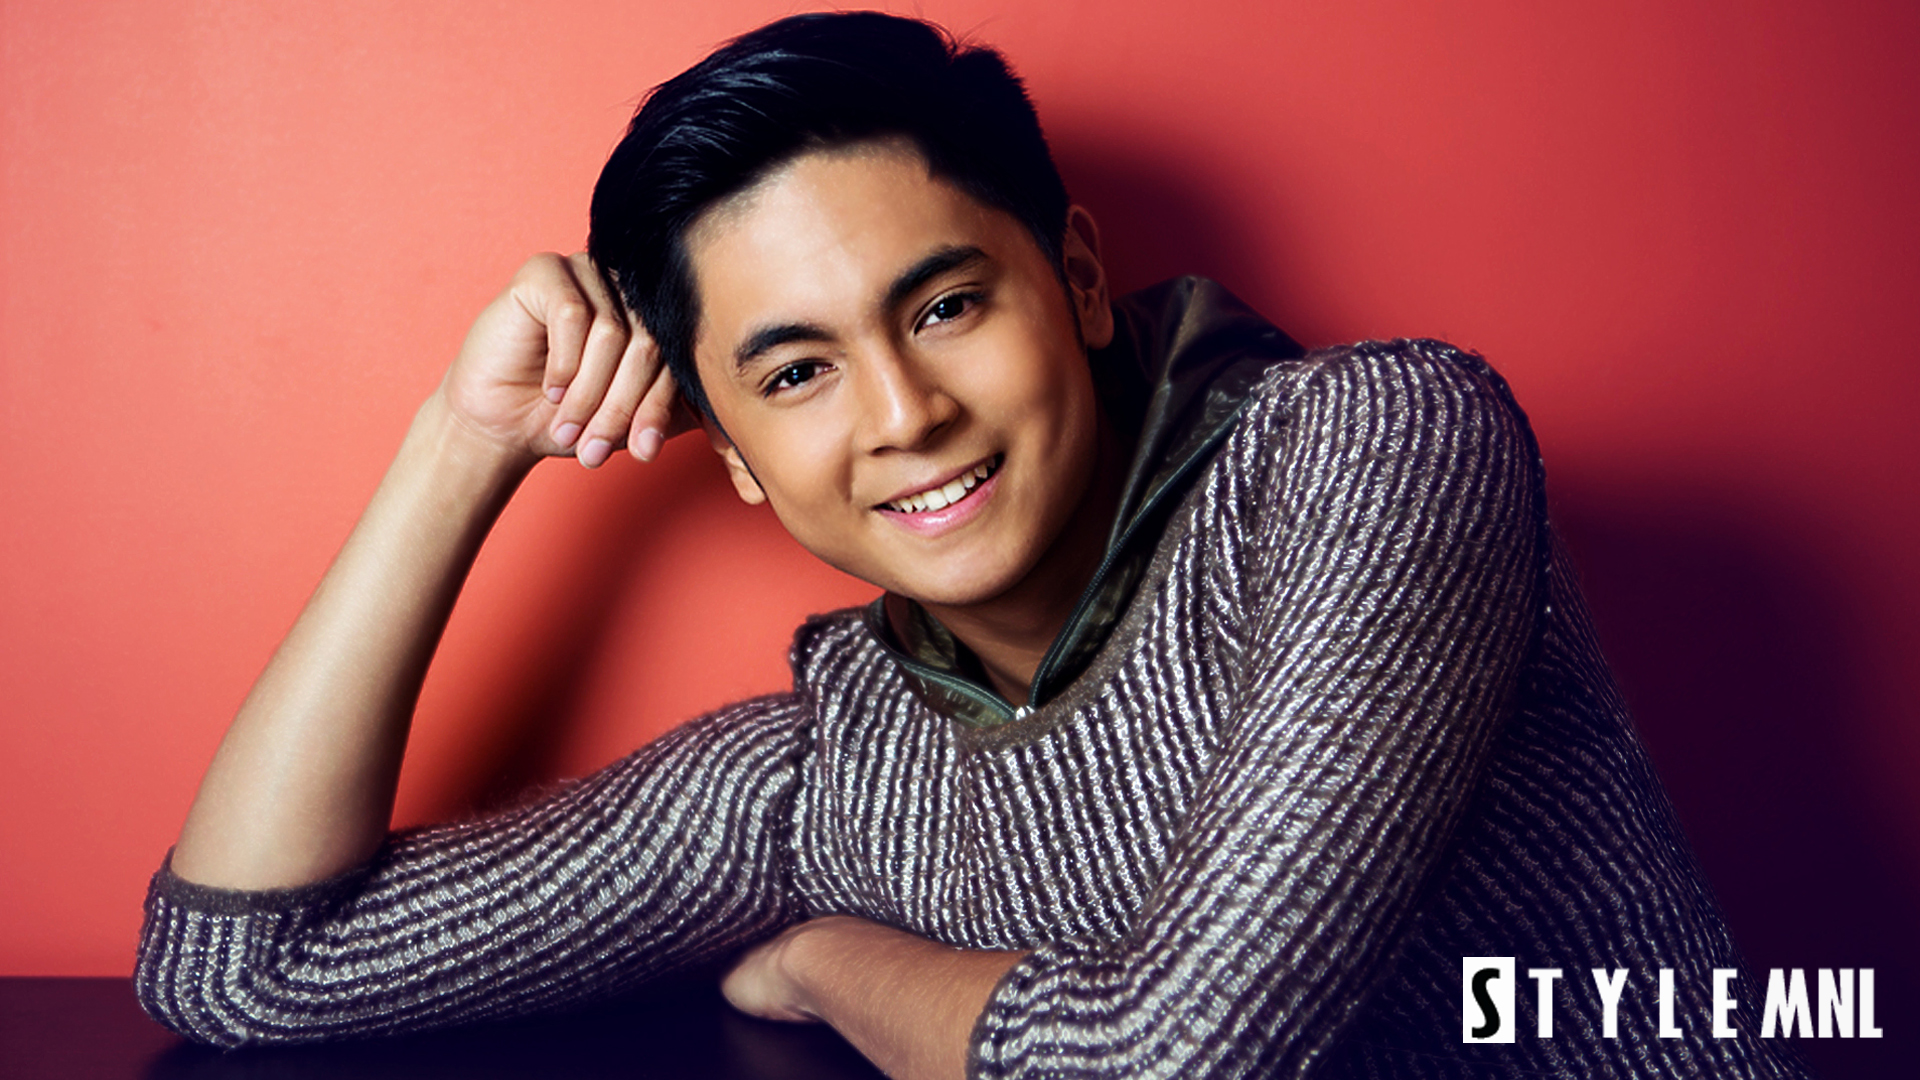 Miguel tanfelix invites you to check his stylemnl editorial this february.